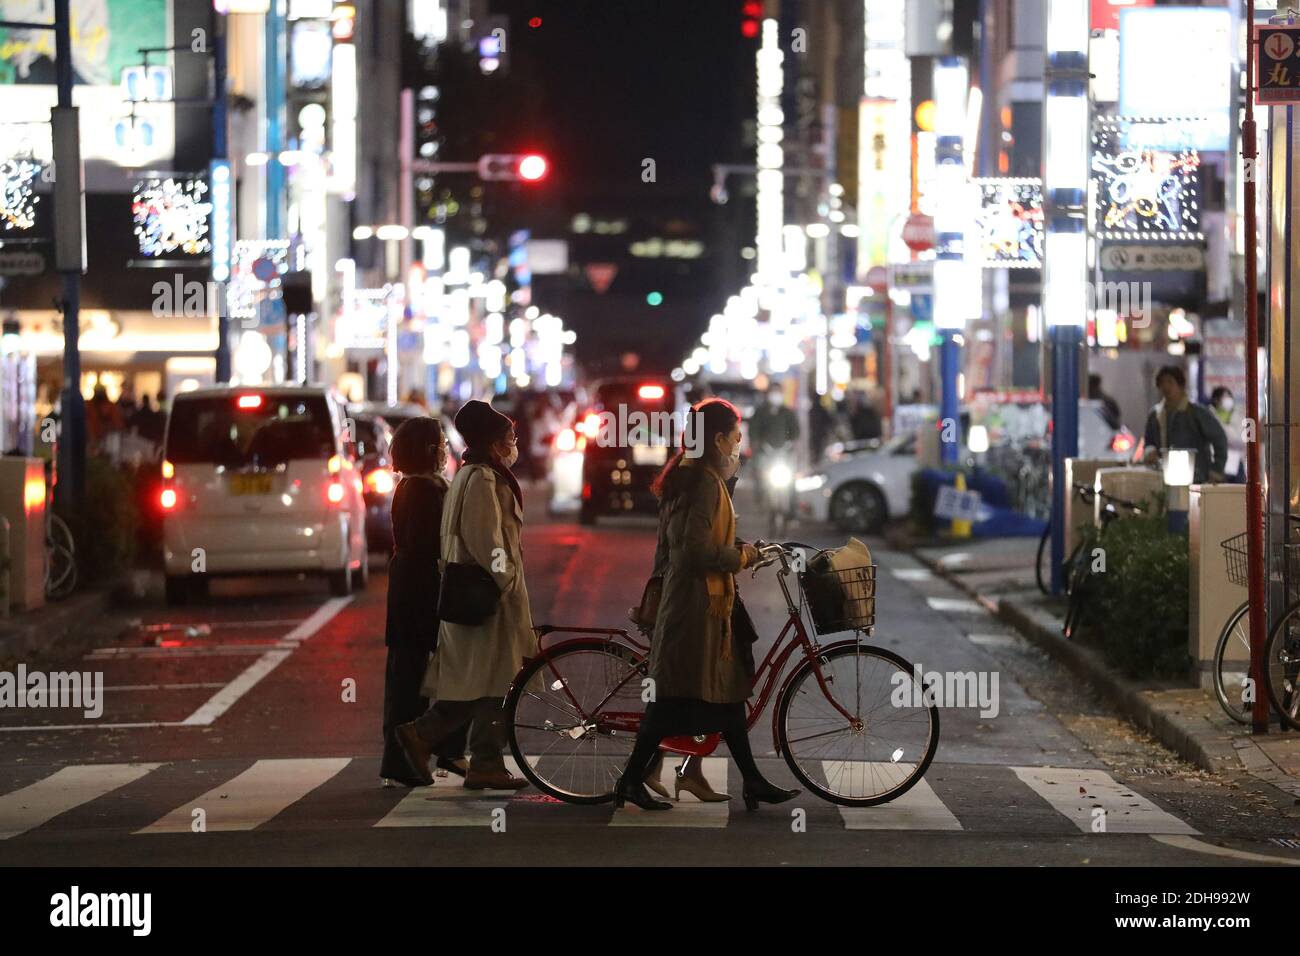 Nagoya, Japan. 10th Dec, 2020. People wearing face masks walk on a street in Nagoya, Japan, on Dec. 10, 2020. On Wednesday, Japan confirmed over 2,810 daily virus cases as the nation struggles to contain the latest surge in infections. Credit: Du Xiaoyi/Xinhua/Alamy Live News Stock Photo